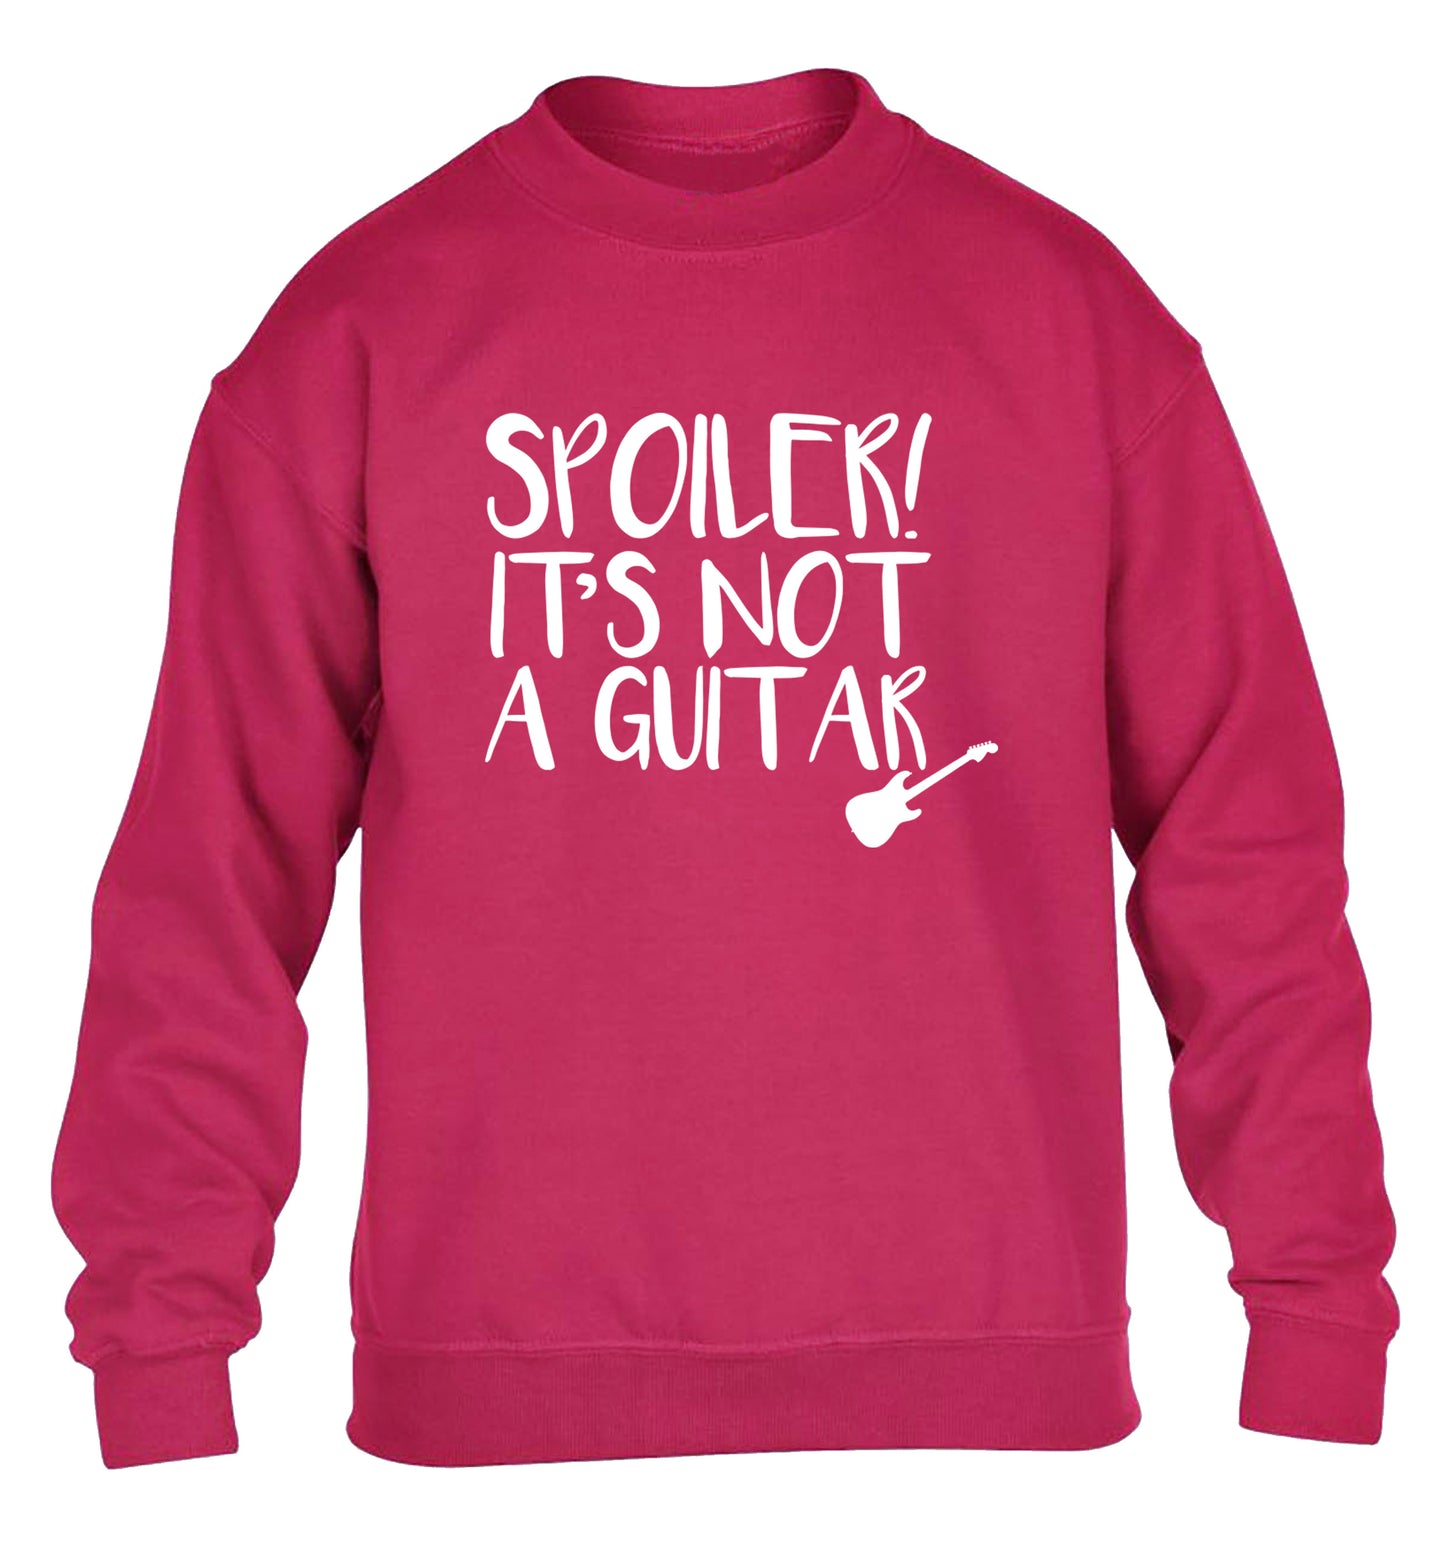 Spoiler it's not a guitar children's pink sweater 12-13 Years